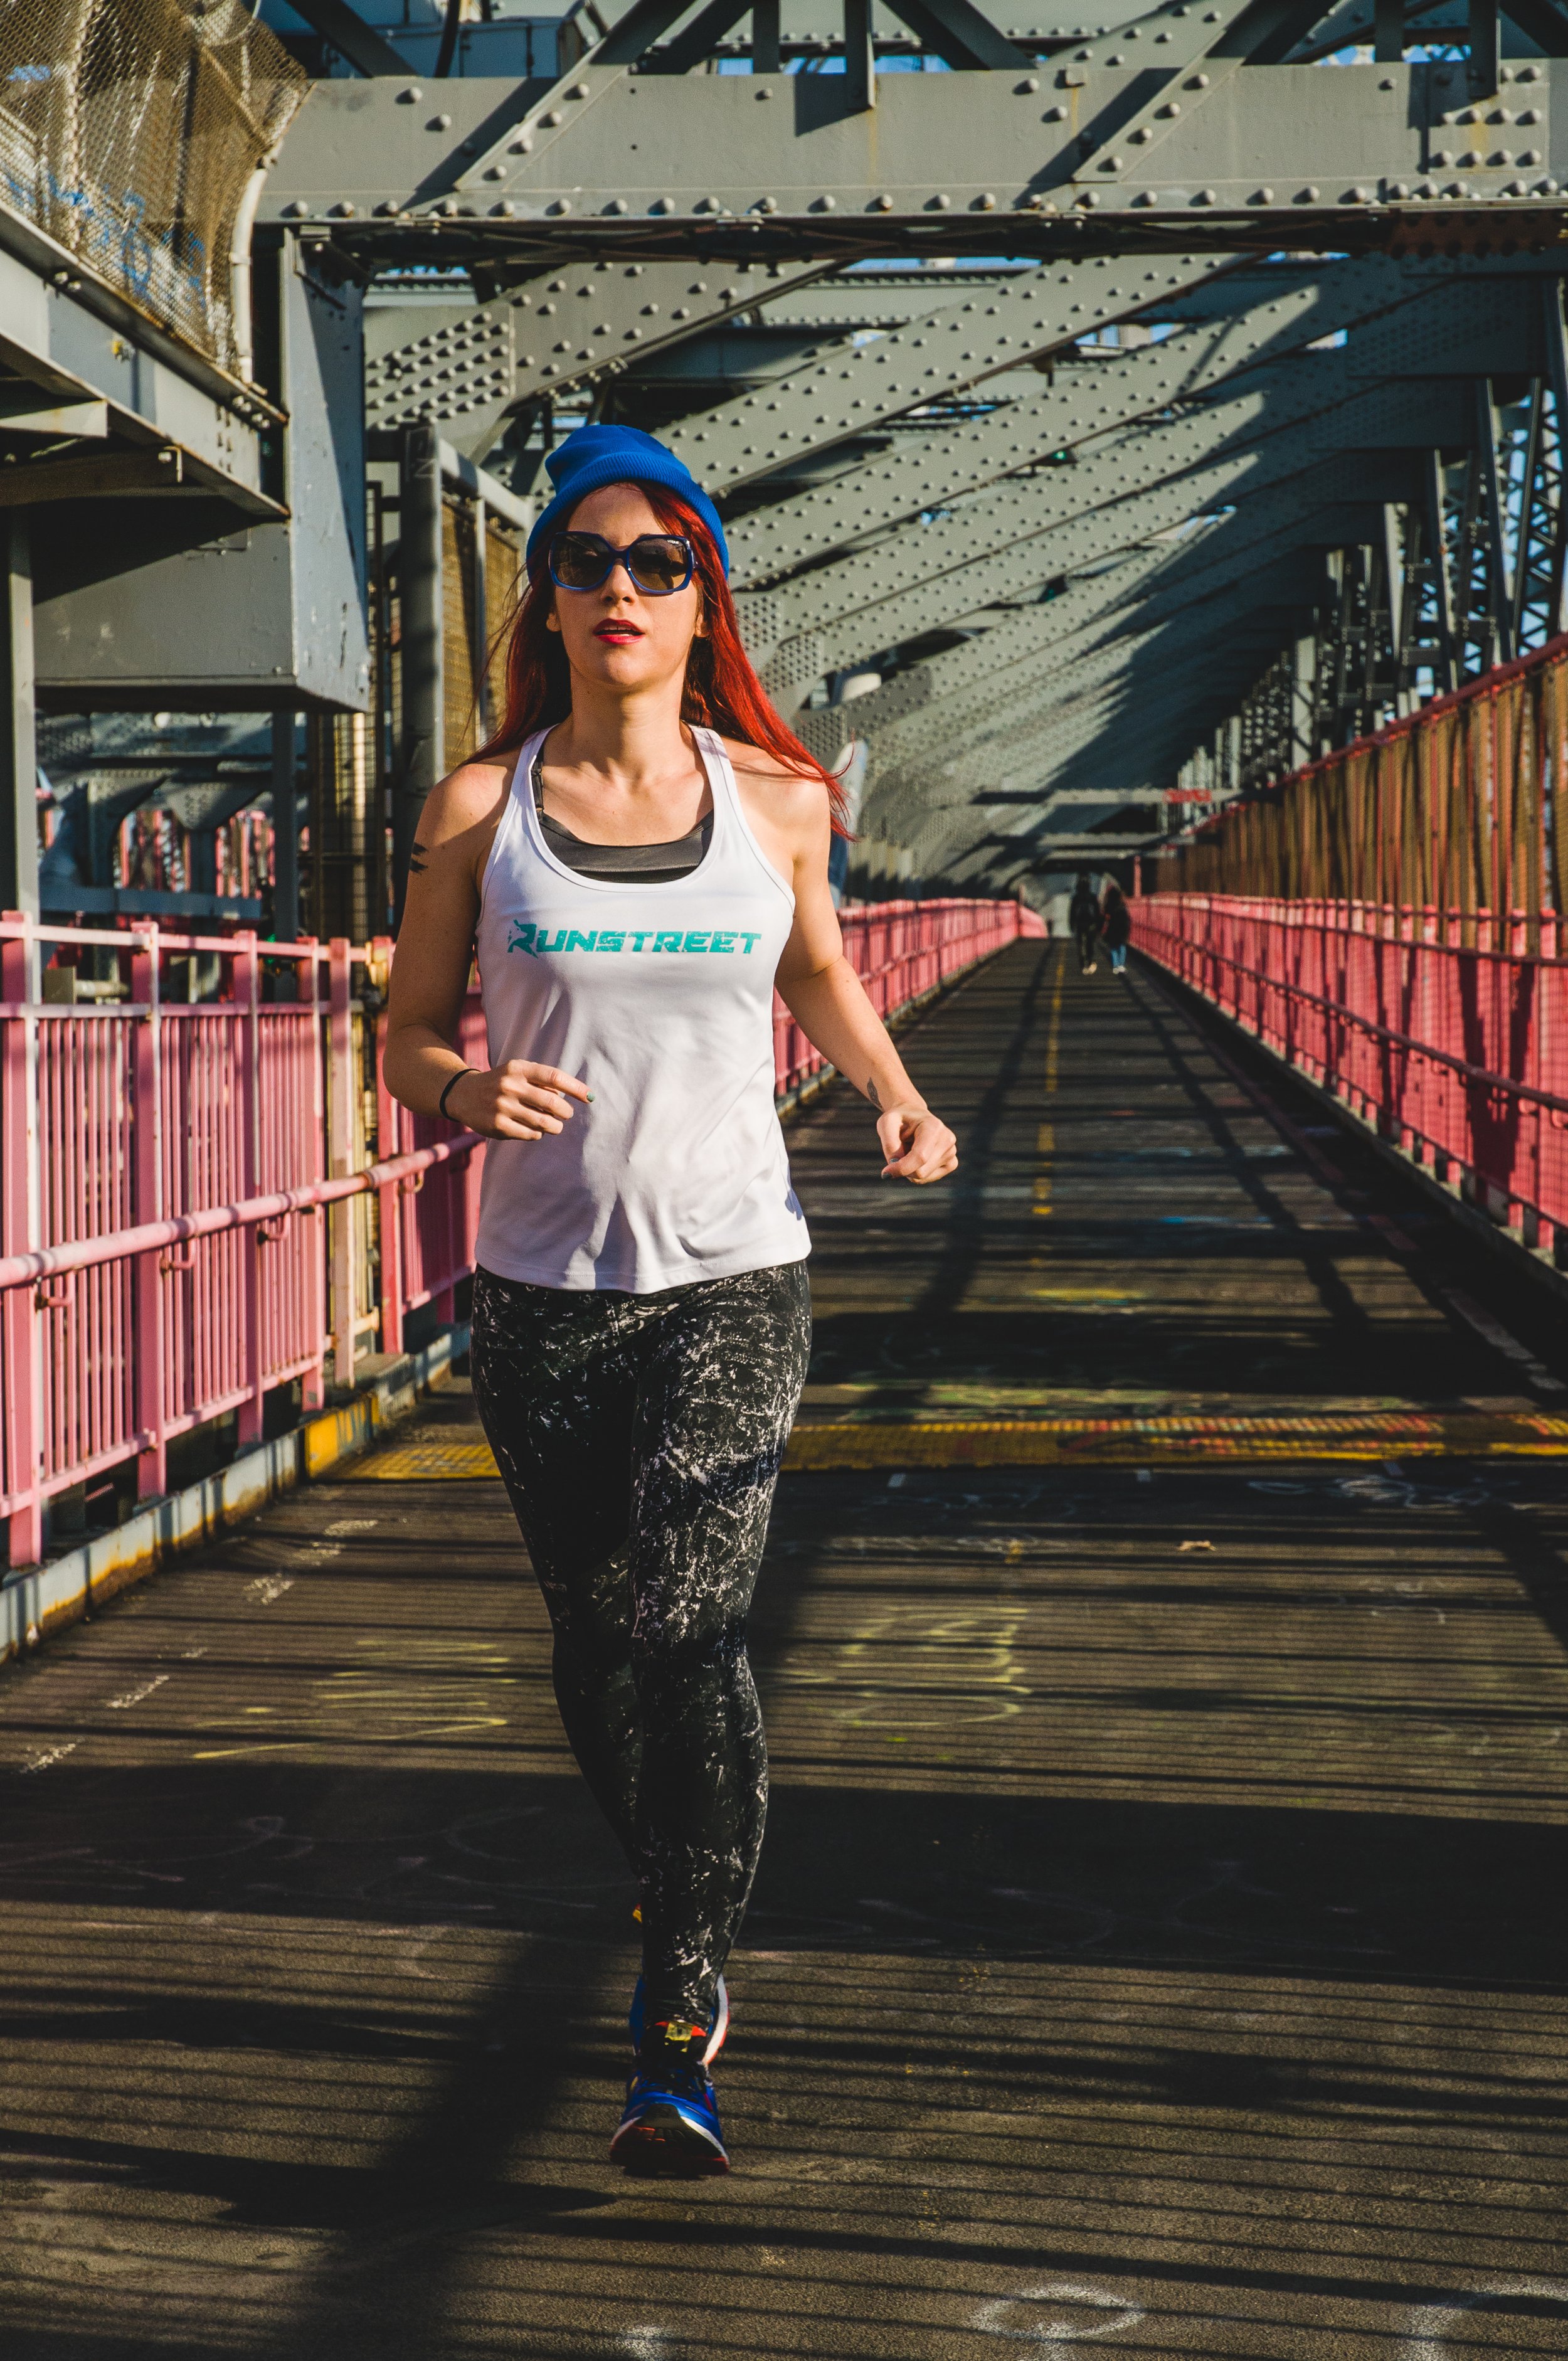 10 Running Workouts to Build Speed and Endurance — Runstreet